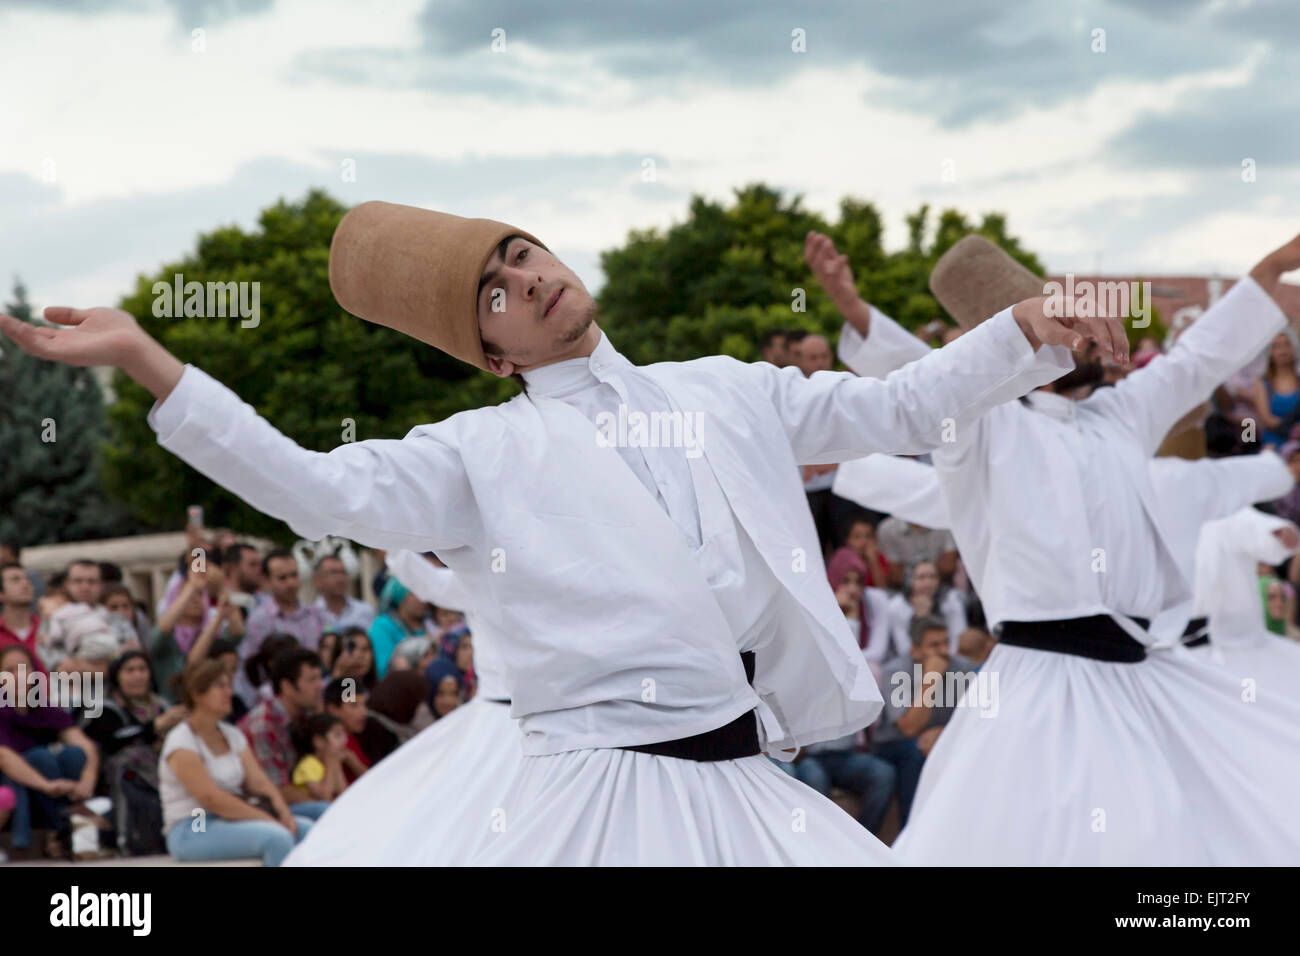 Konya, Konya Province, Turkey. Whirling Dervishes. UNESCO proclaimed the 'The Mevlevi Sema Ceremony' of Turkey (seen here) amongst the Masterpieces of Stock Photo